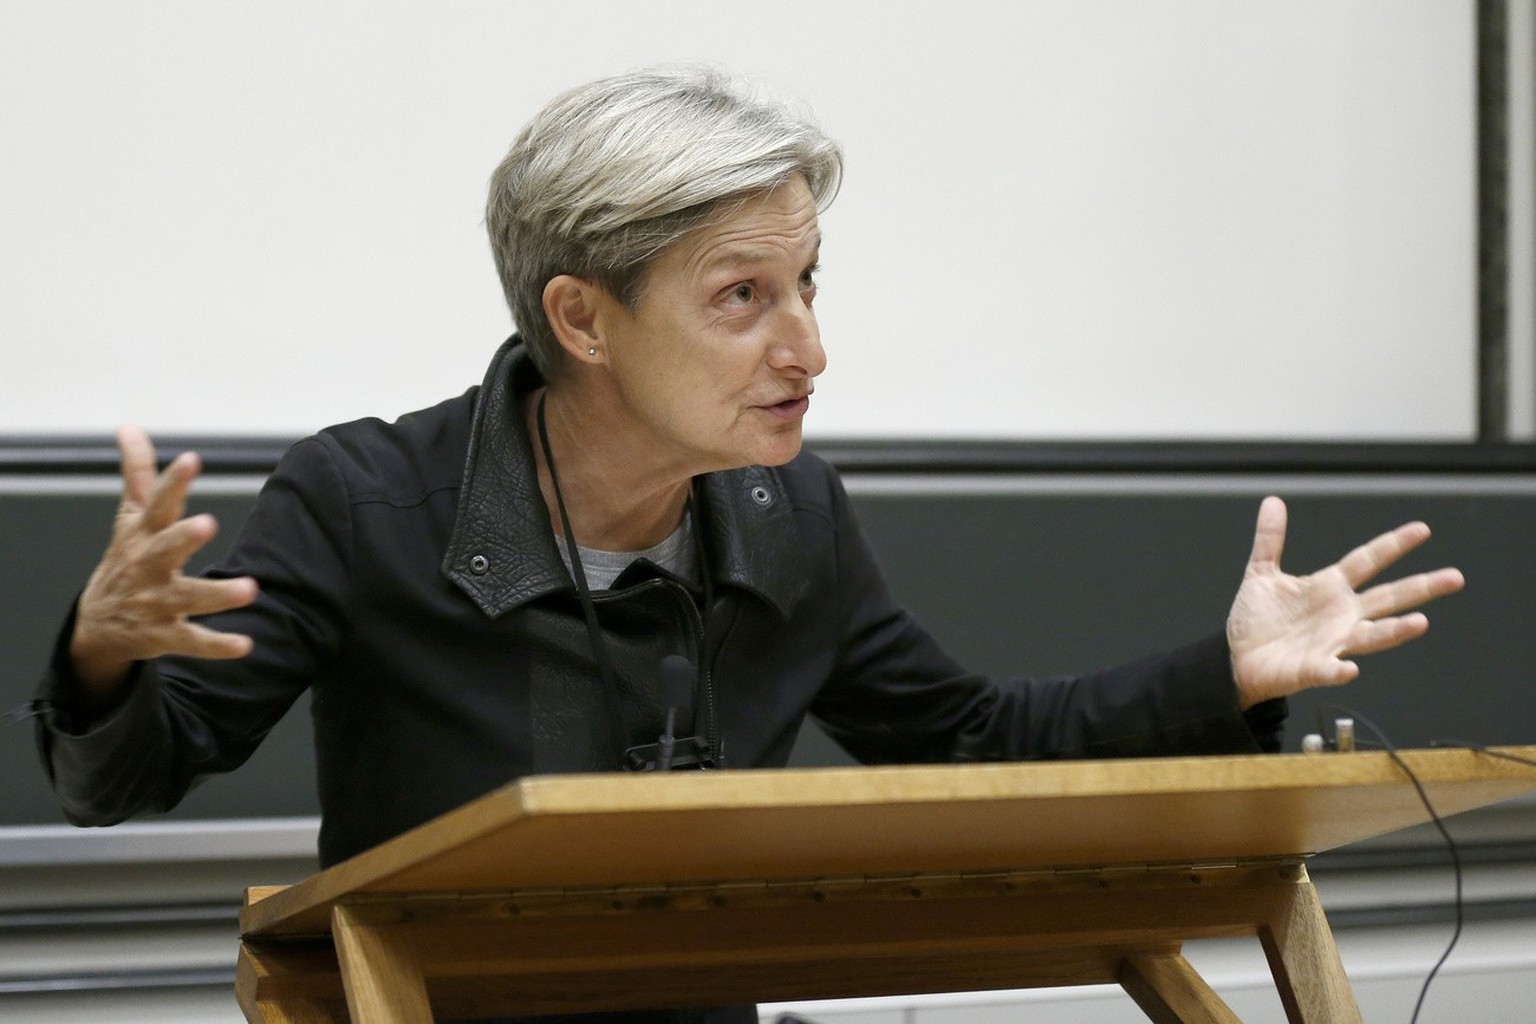 US philosopher Judith Butler delivers a lecture entitled &quot;Interpreting Non-Violence&quot; at the University of Fribourg, Switzerland, Friday, November 14, 2014. (KEYSTONE/Peter Klaunzer)